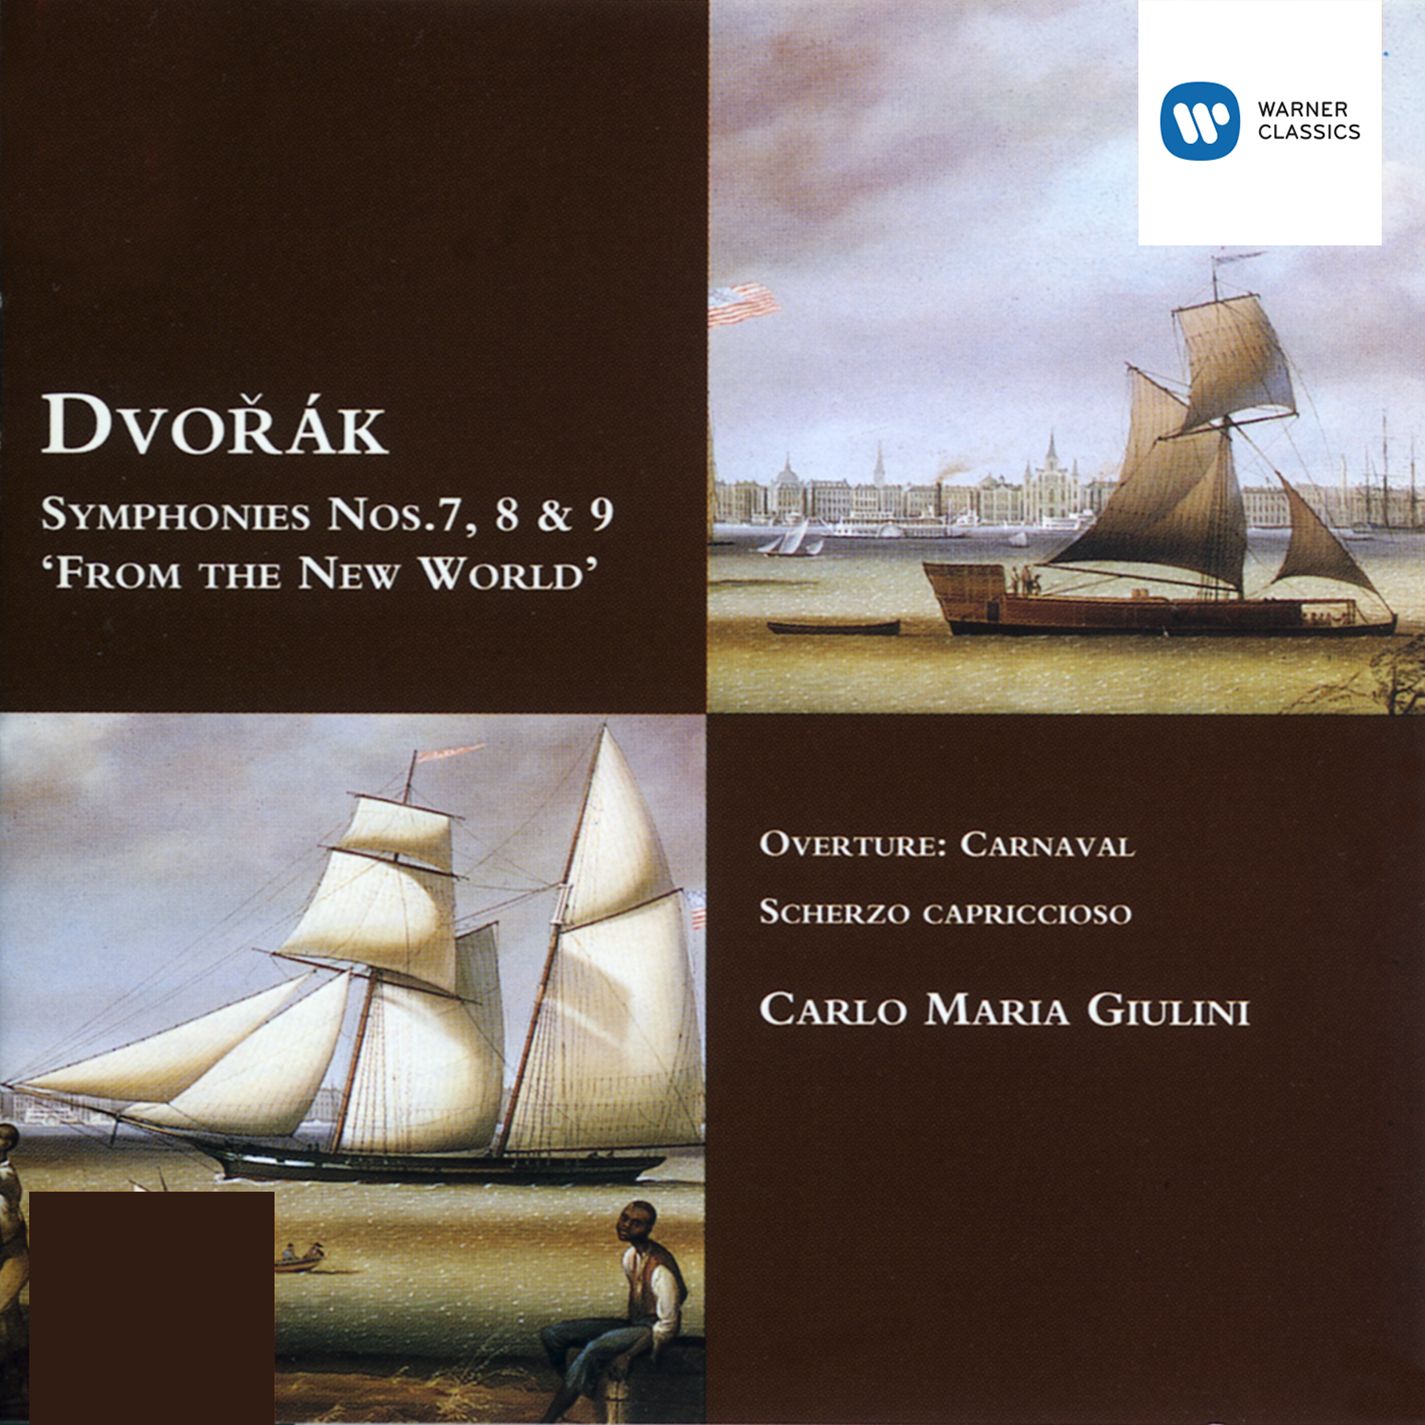 Symphony No. 9 in E Minor, Op. 95, B. 178 "From the New World":III. Molto vivace